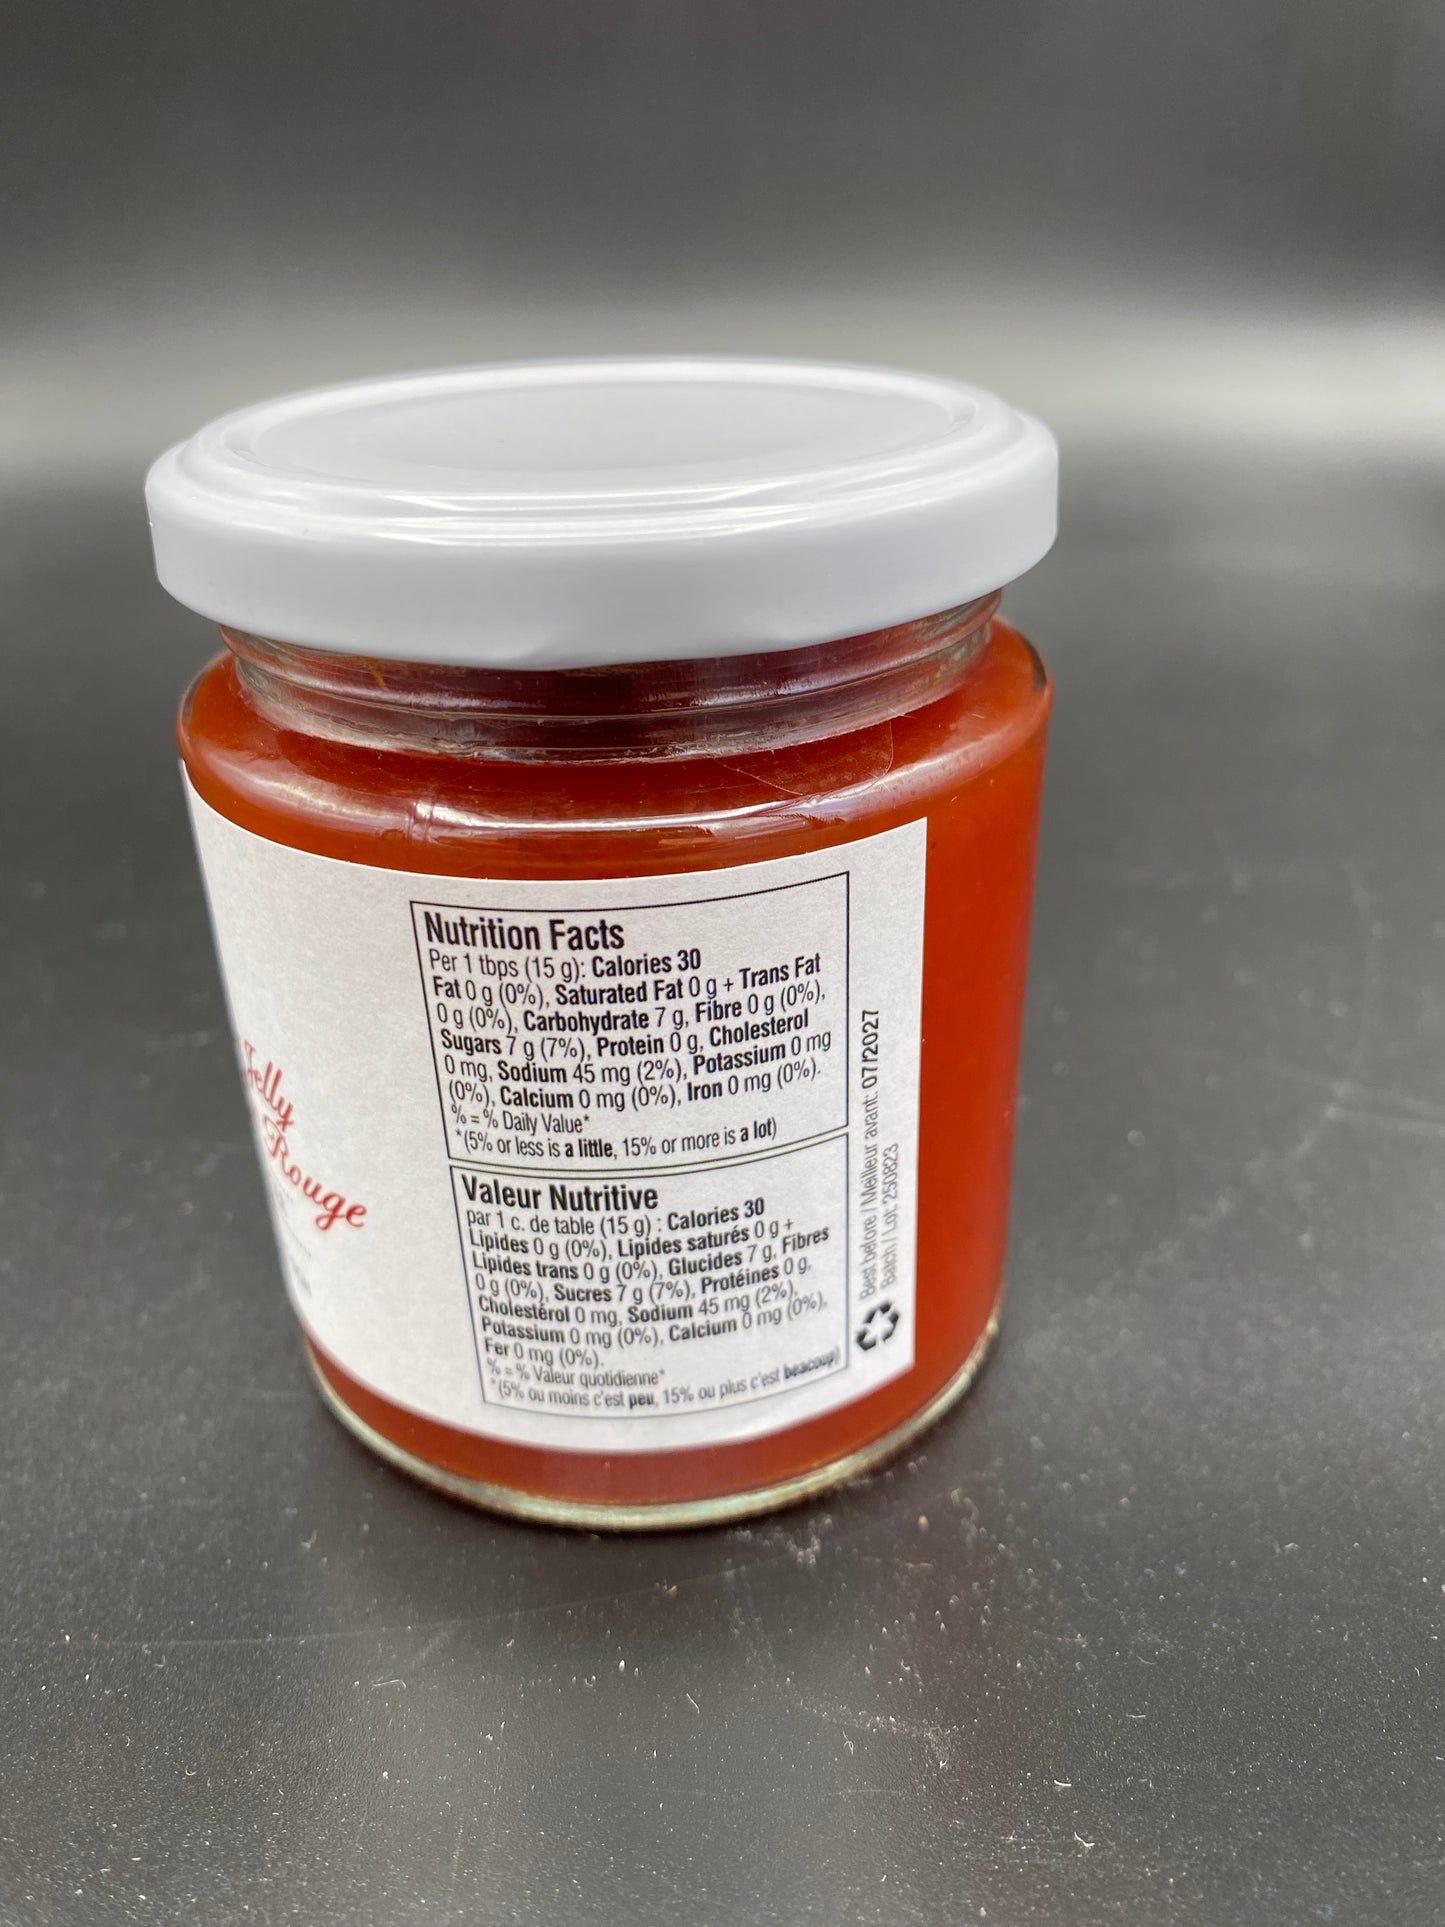 Red Pepper Jelly 250ml